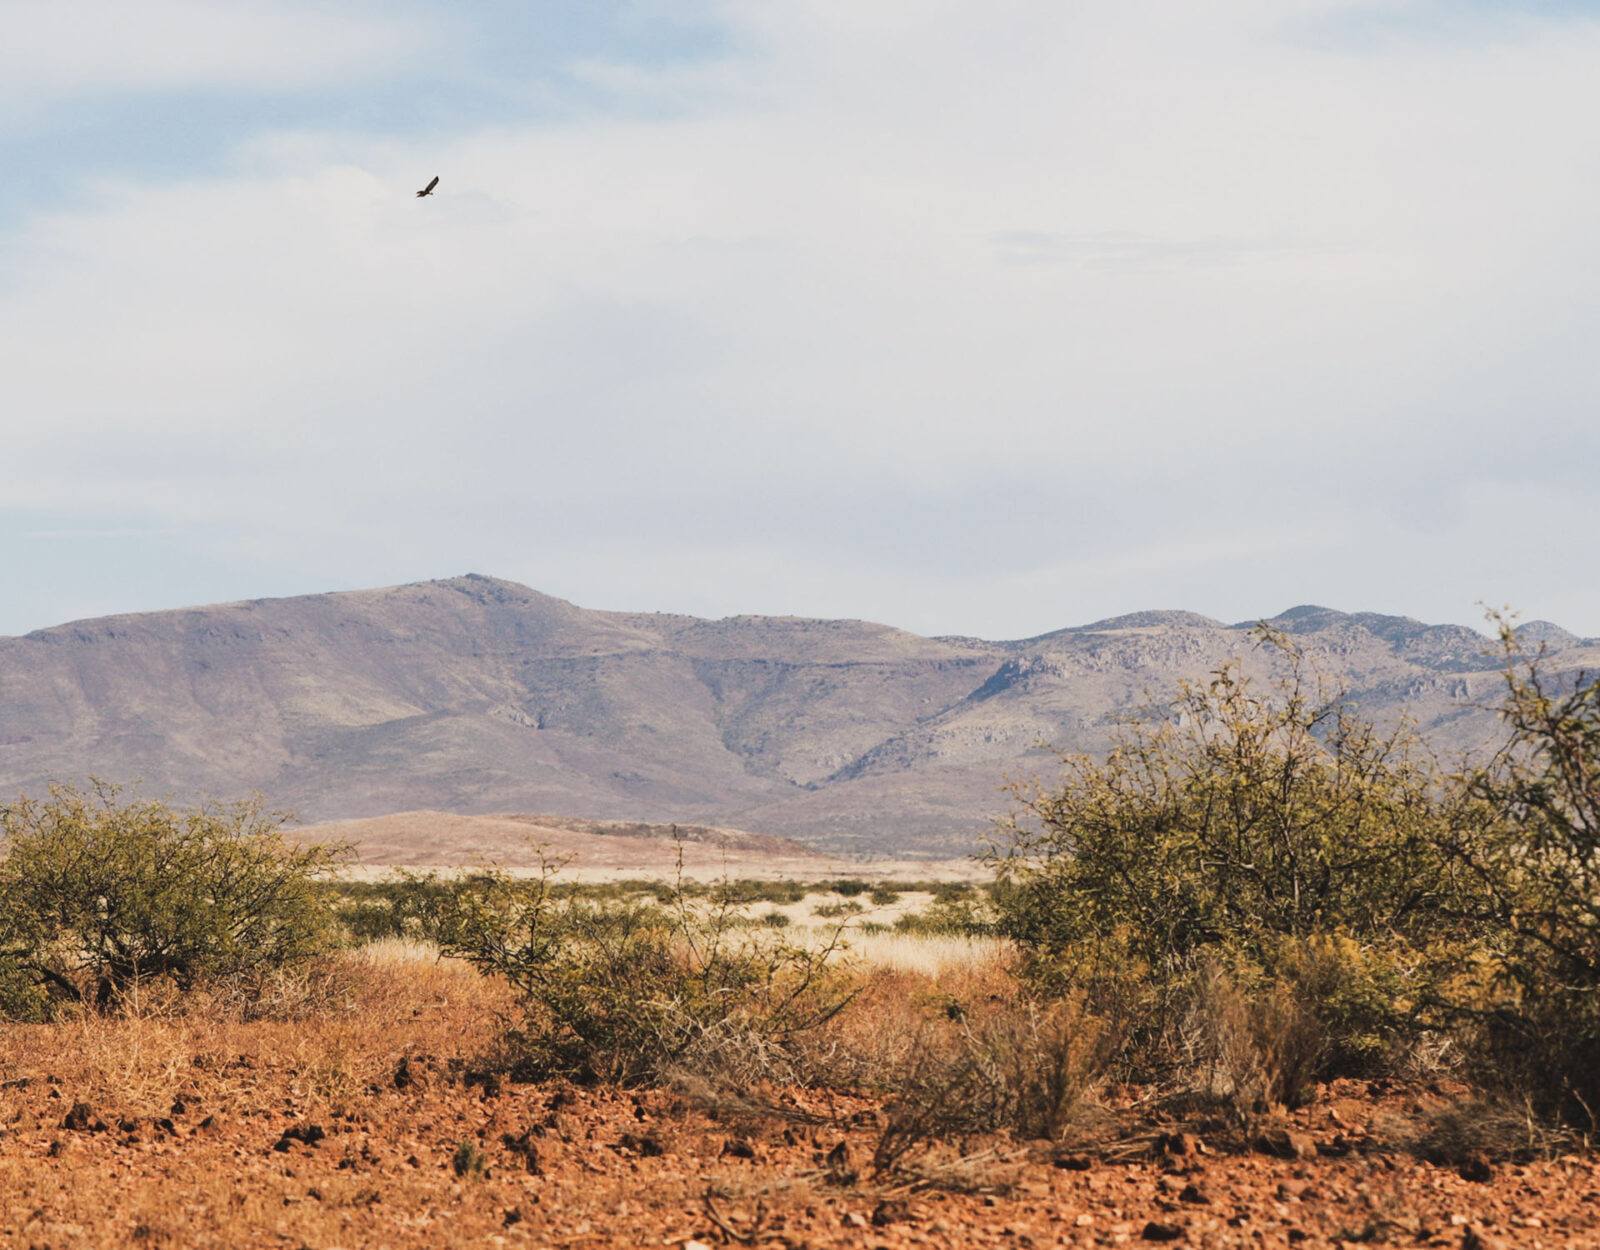 A red desert landscape with mountains in the distance and a large bird of prey flying overhead. 